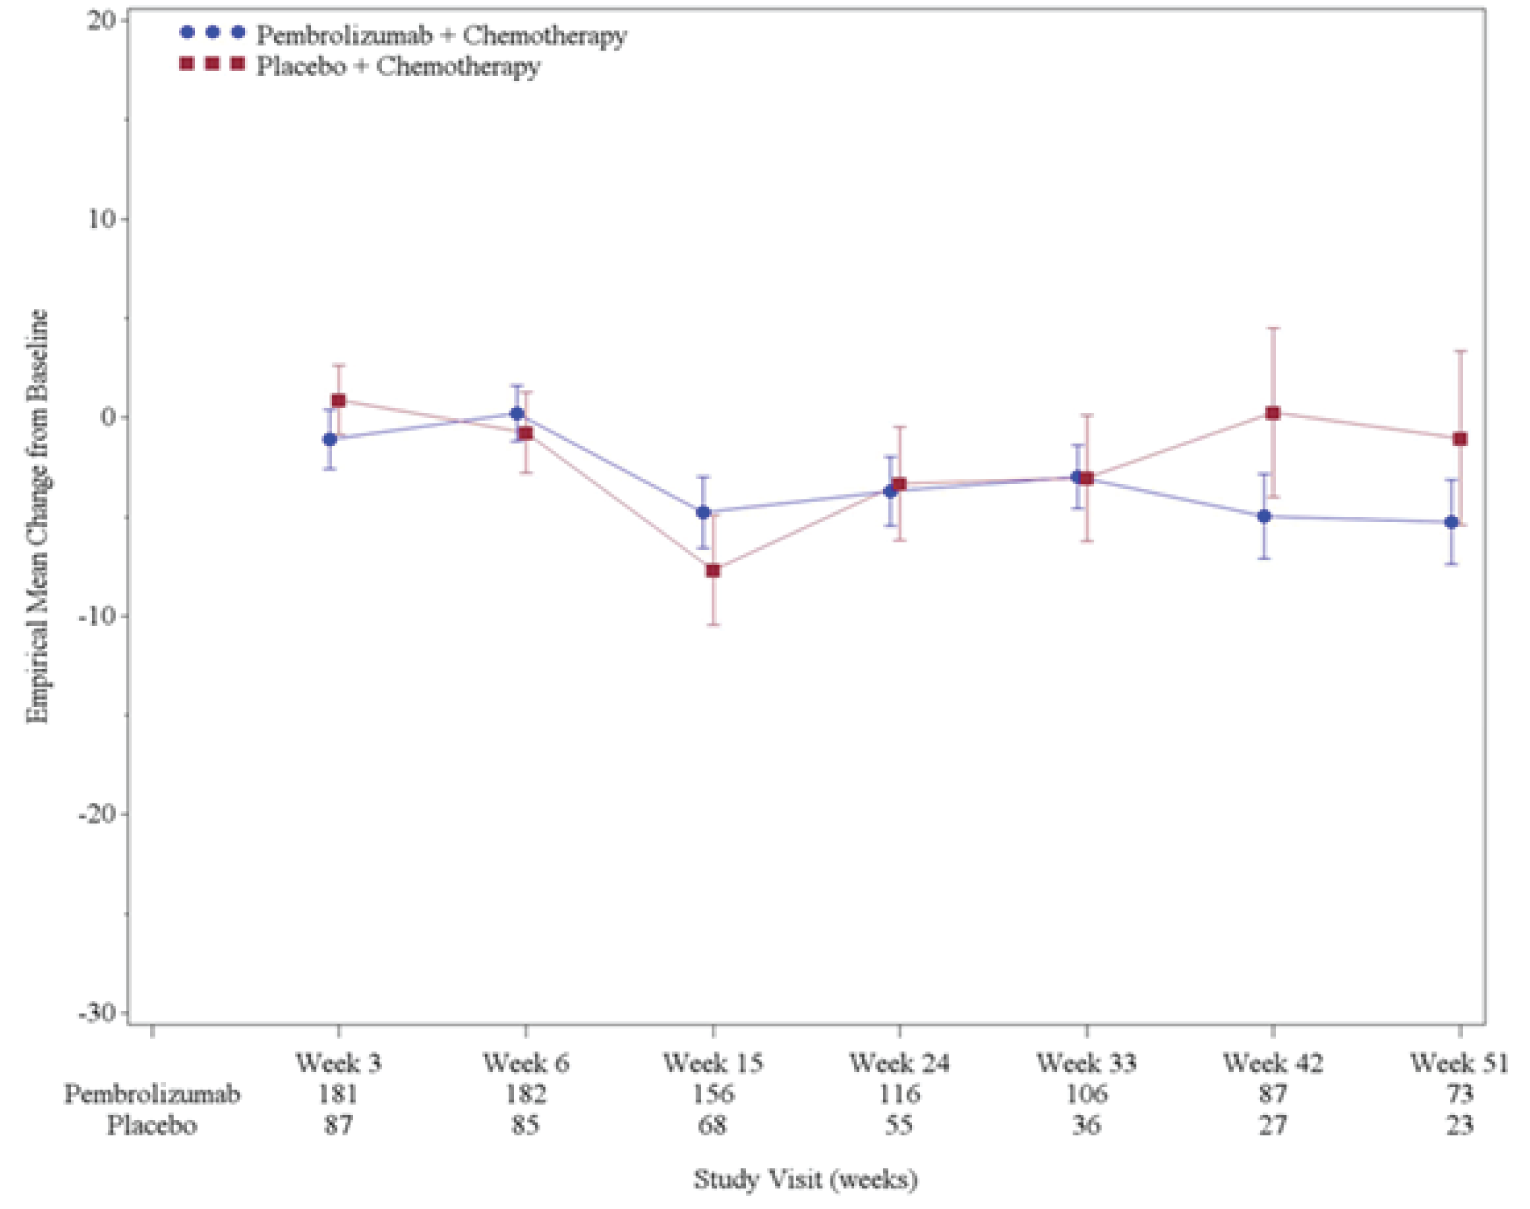 The mean change from neoadjuvant baseline in the EQ VAS scale across time for patients receiving pembrolizumab plus chemotherapy versus those receiving placebo plus chemotherapy.